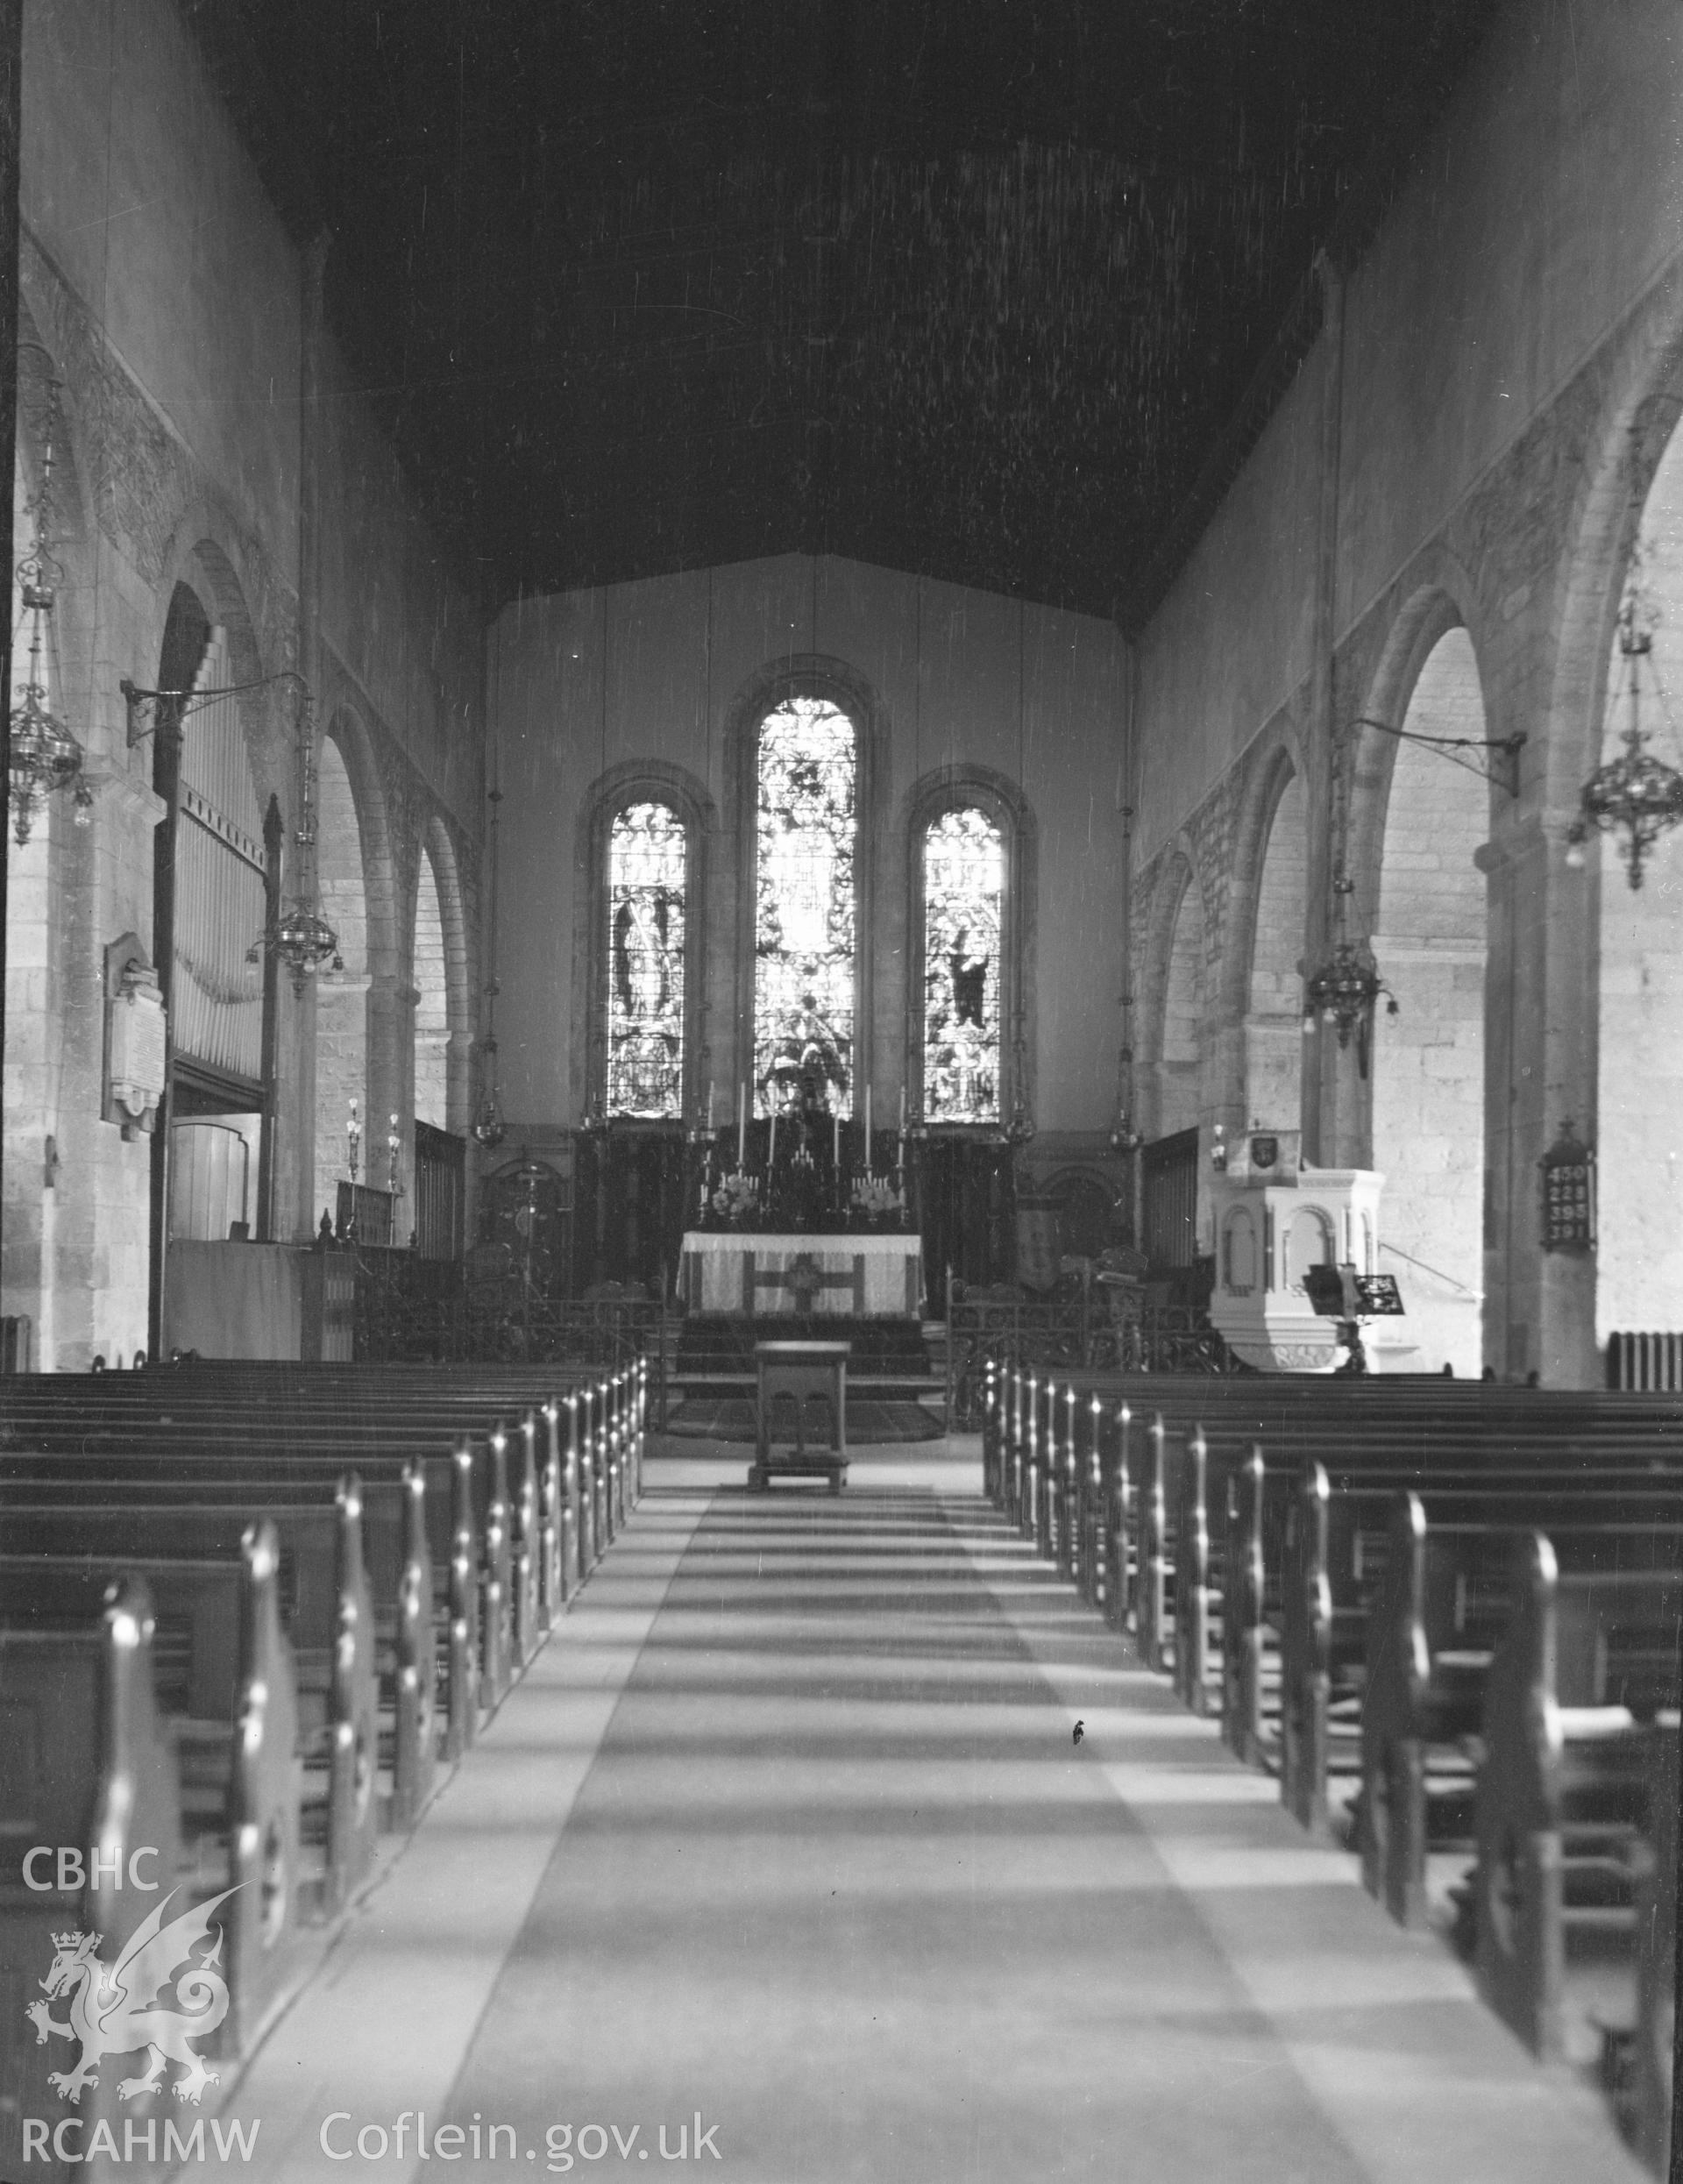 Digital copy of a nitrate negative showing interior of St Mary's Church, Margam - looking towards the altar. From the National Building Record Postcard Collection.